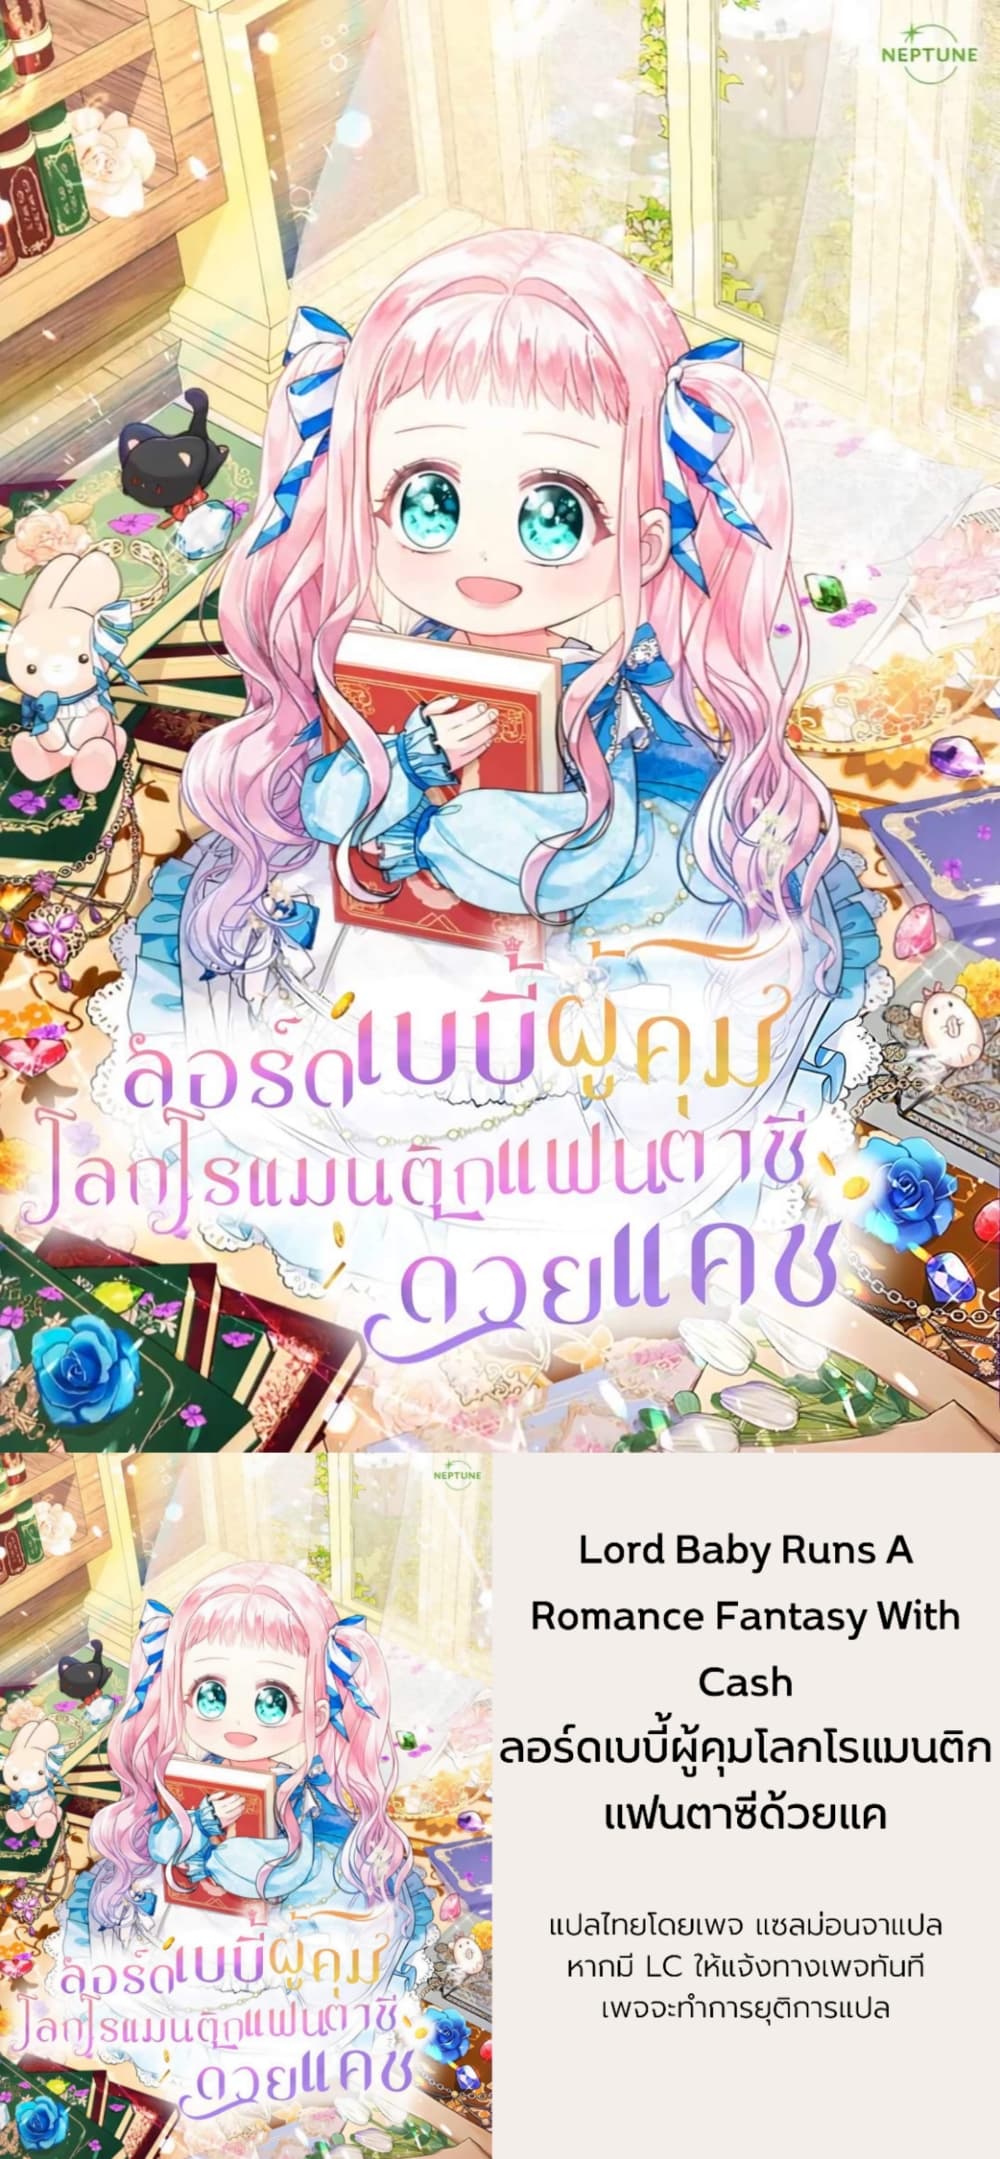 Lord Baby Runs a Romance Fantasy With Cash 10-10